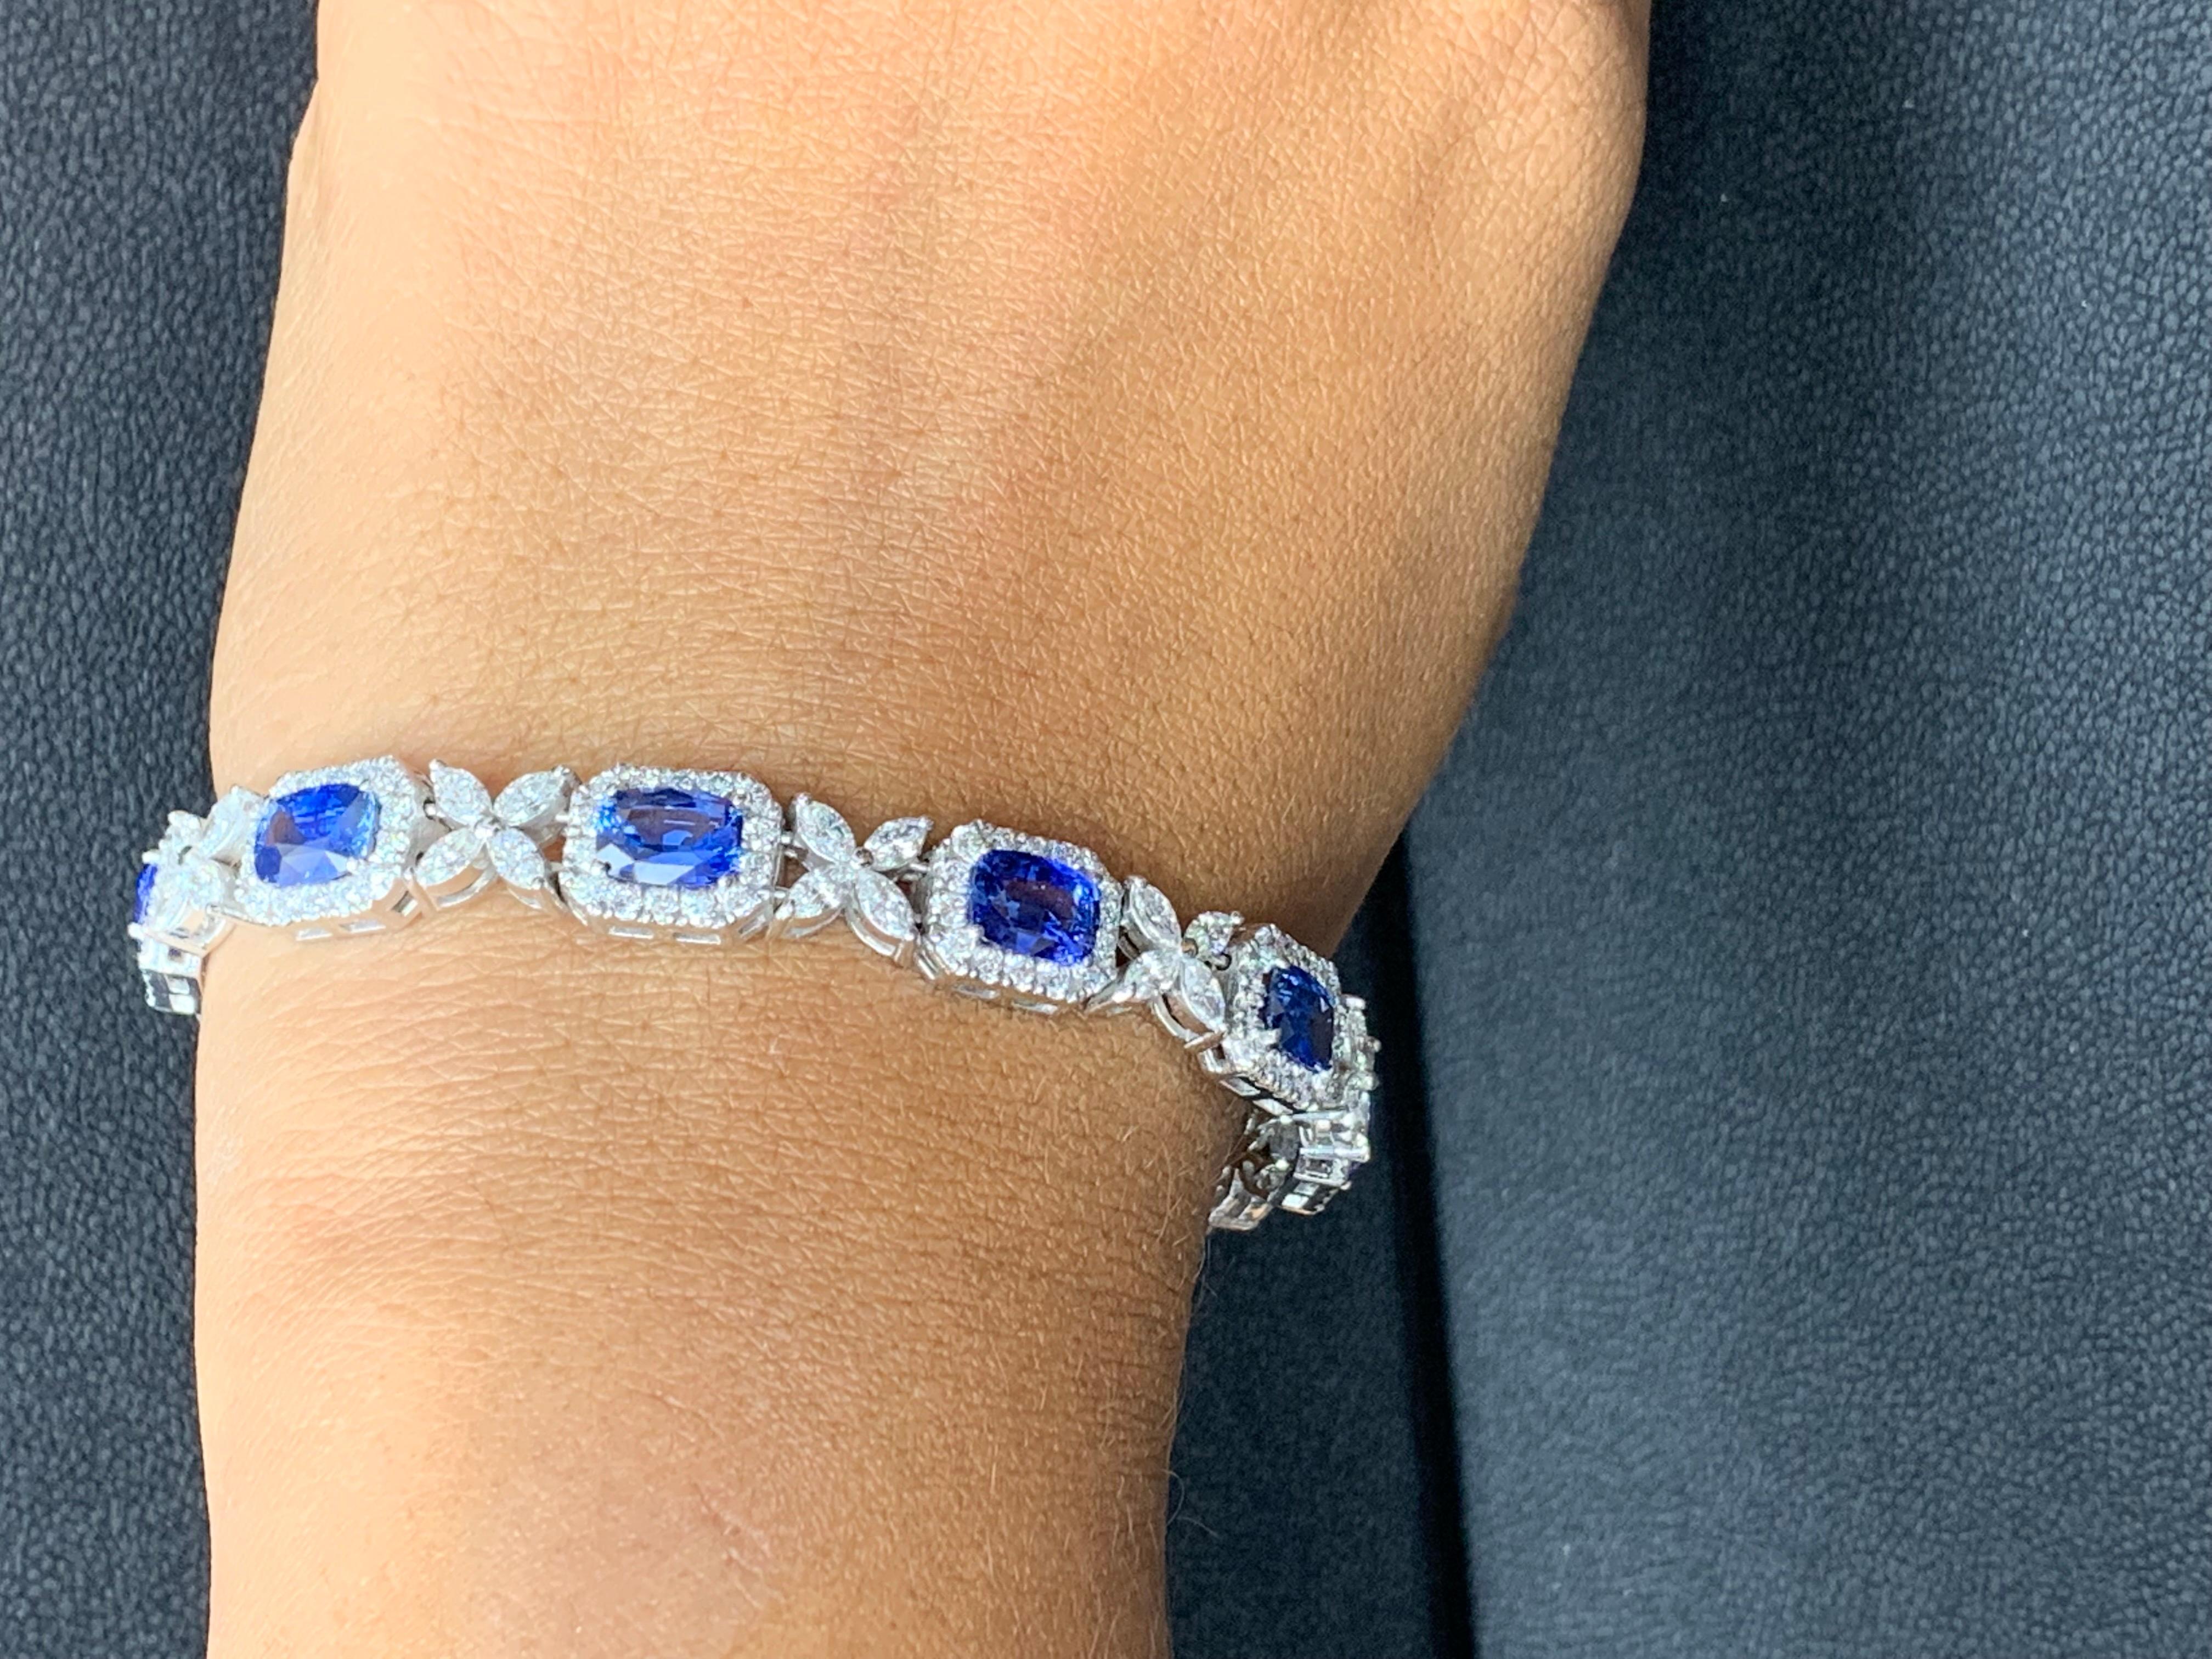 10.47 Carat Cushion cut Sapphire and Diamond Bracelet in 14K White Gold For Sale 8